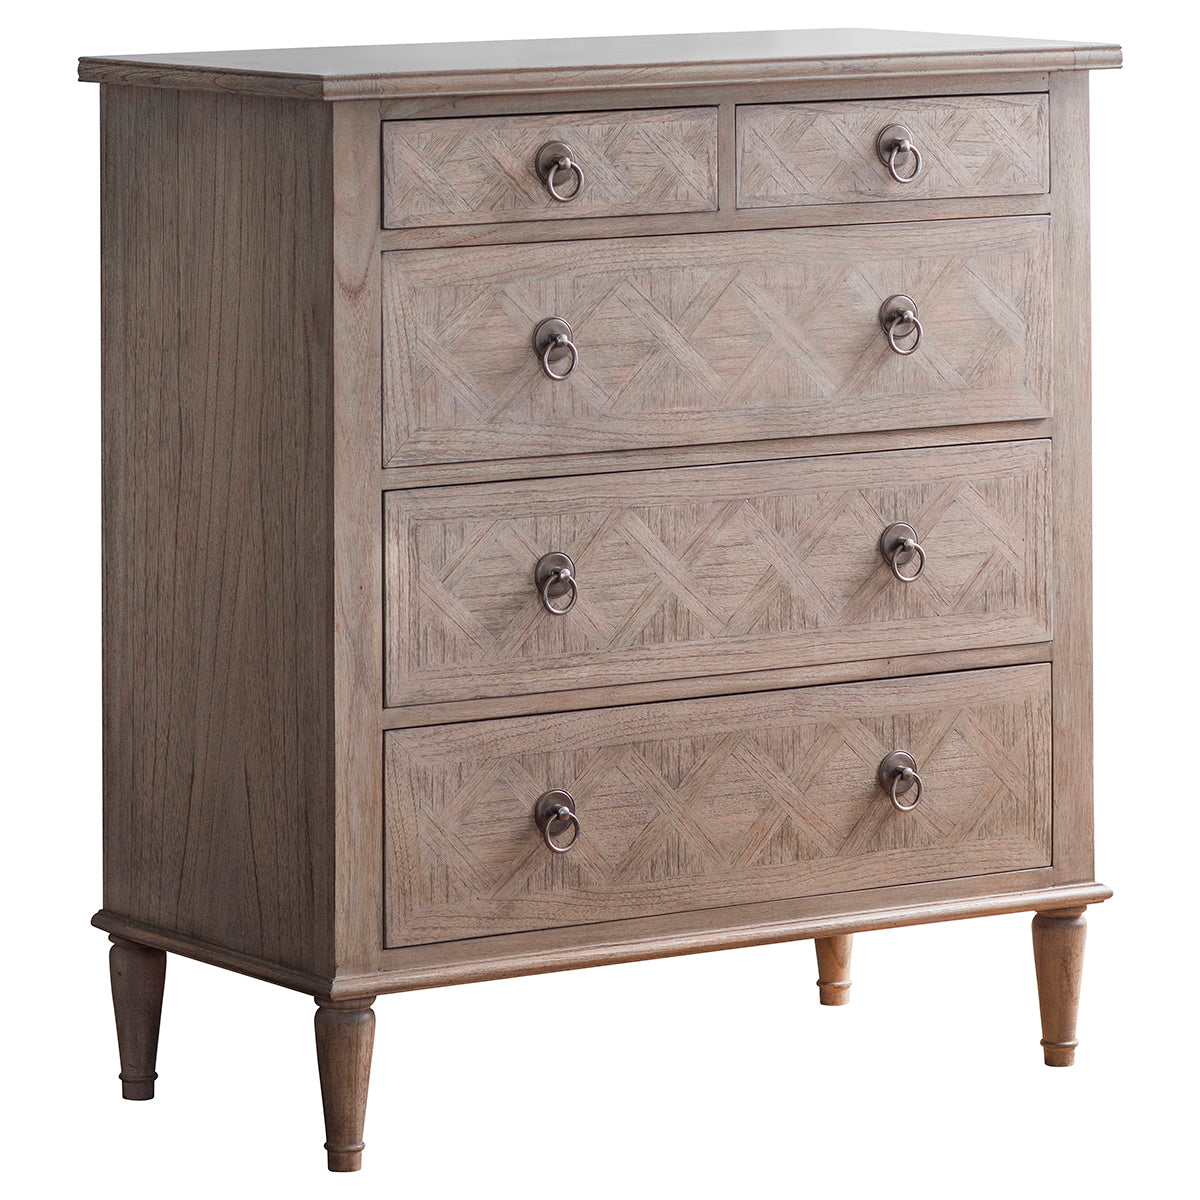 An ornate home furniture piece, the Belsford 5 Drawer Chest from Kikiathome.co.uk enhances interior decor.